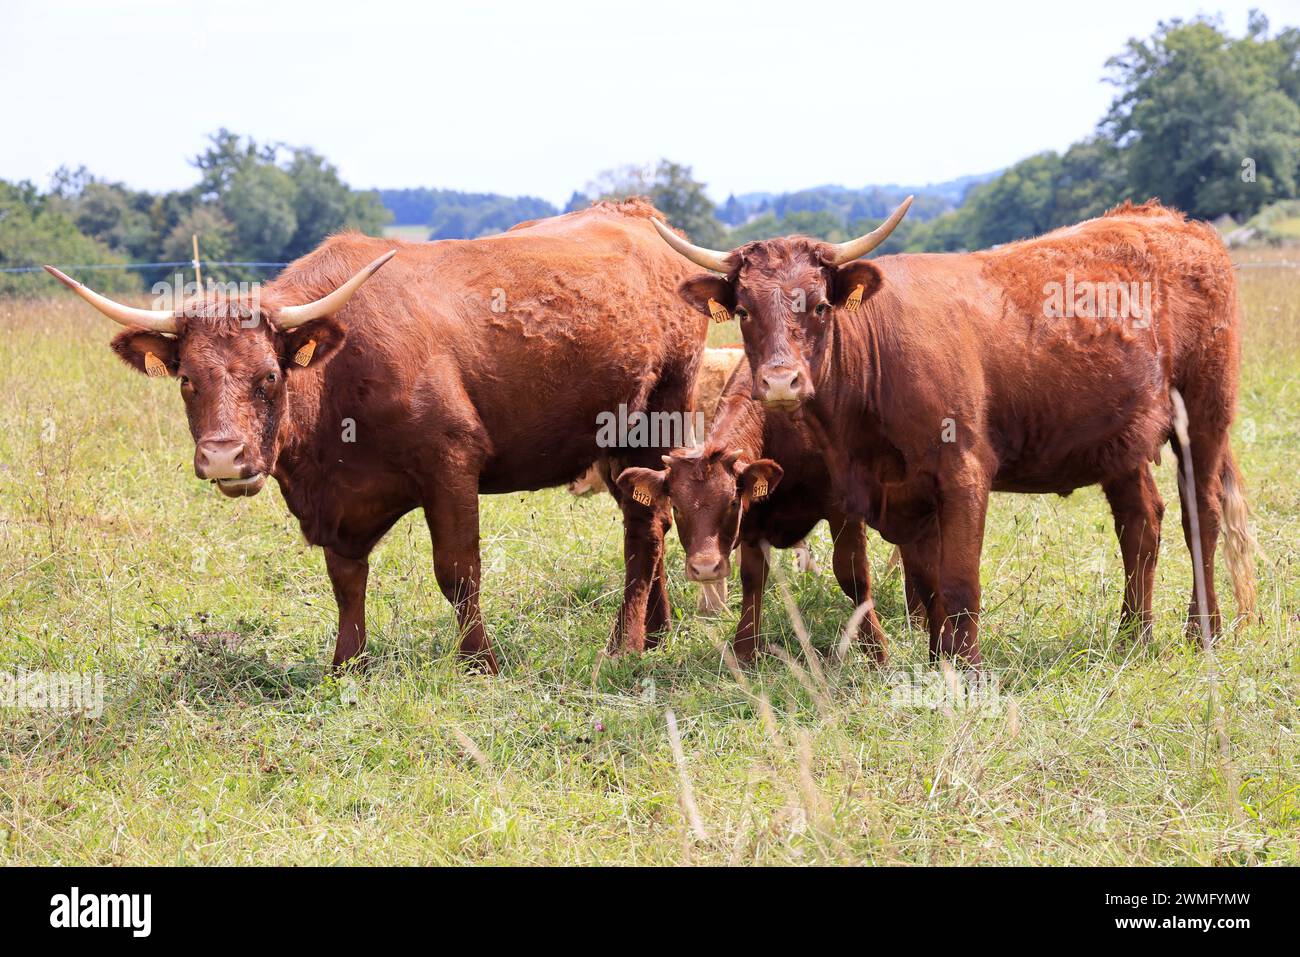 French Salers breed milk and meat cows characterized by their mahogany-colored coat during summer and heatwaves. Agriculture, cattle breeding and huma Stock Photo